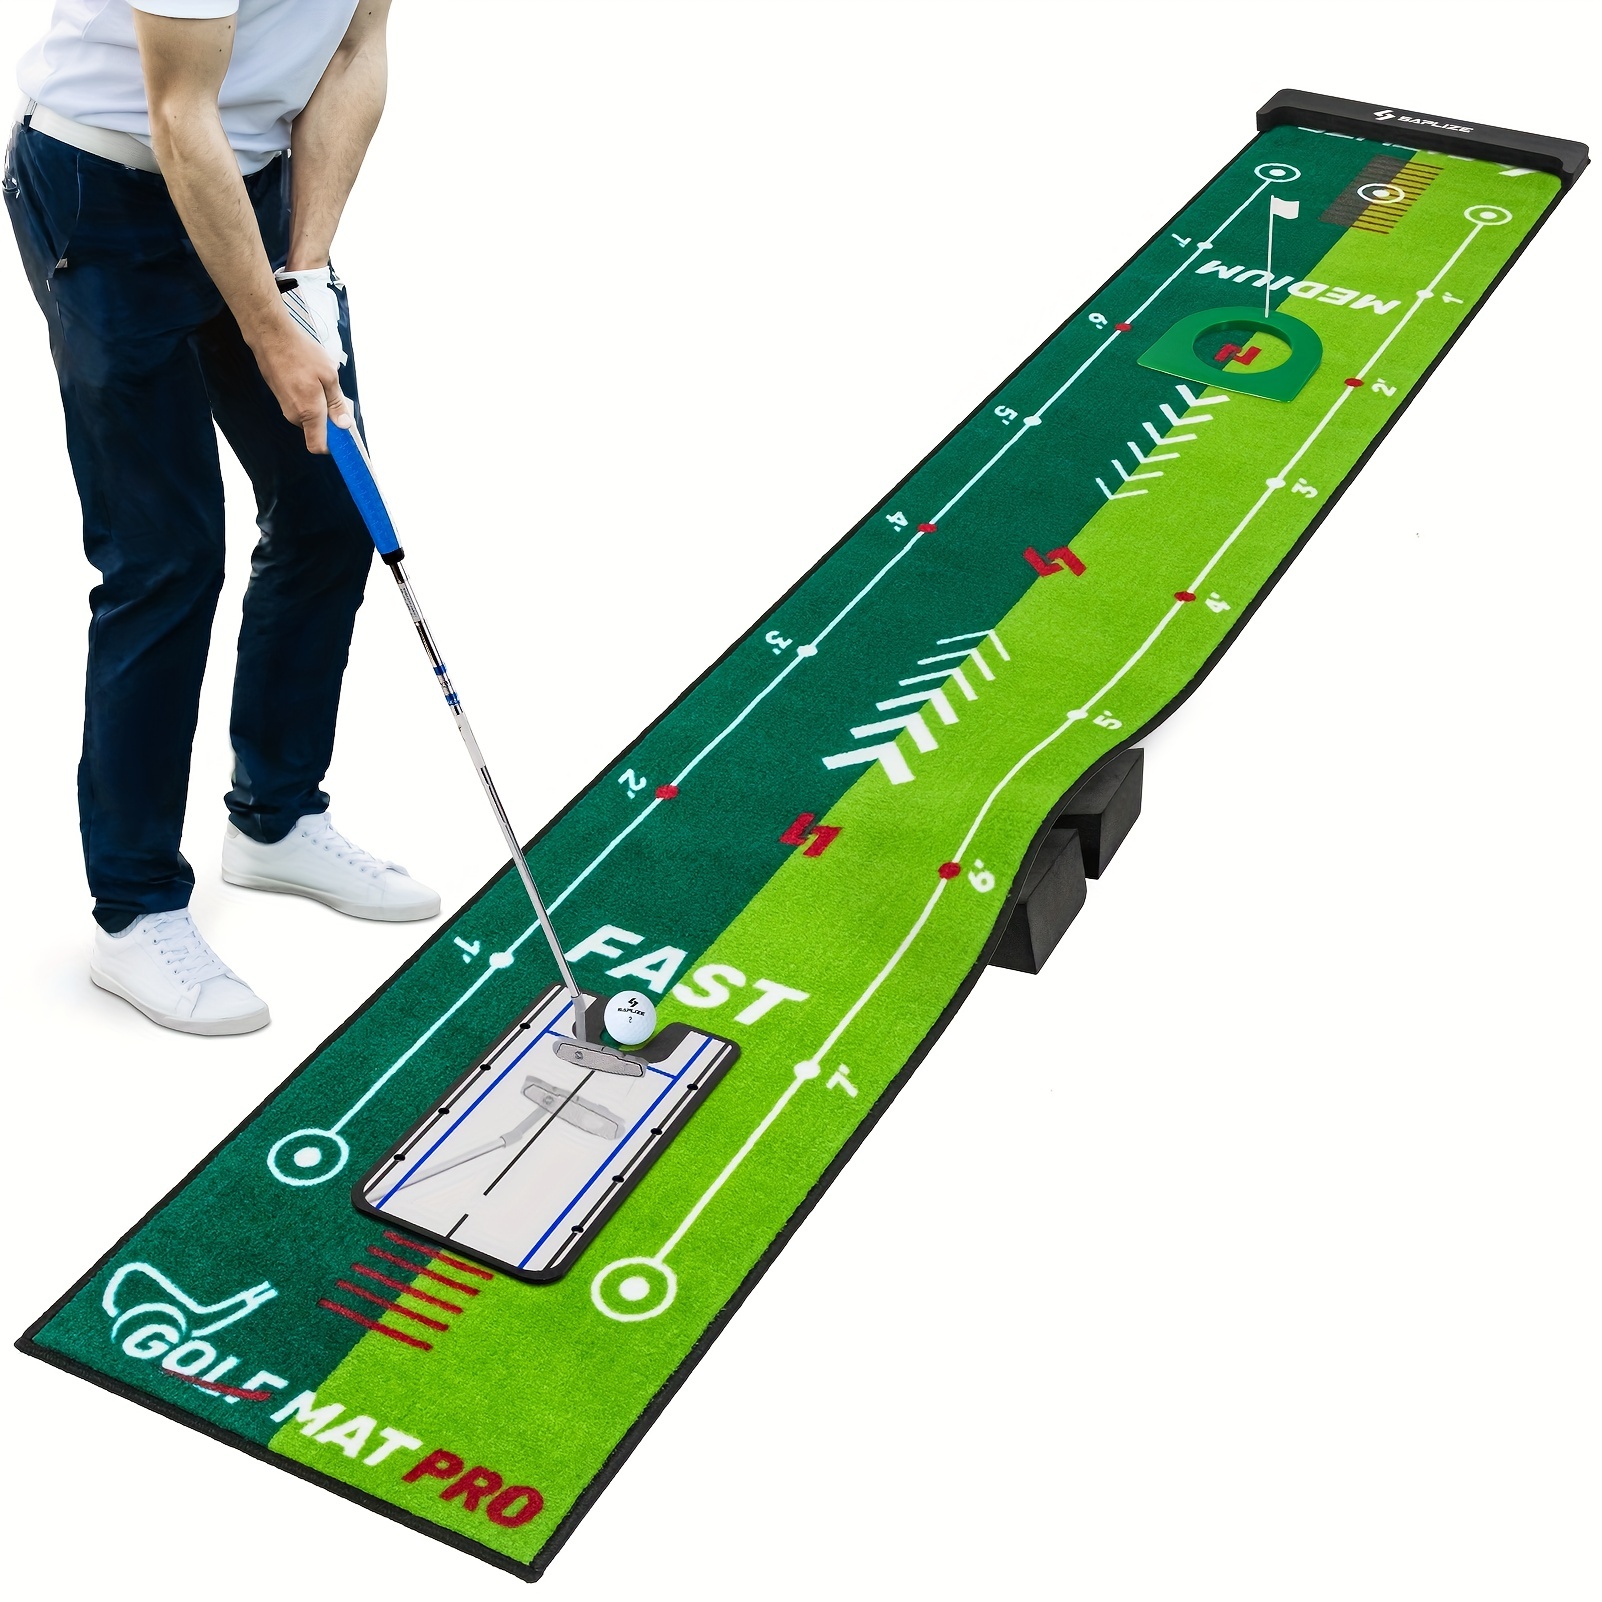 two speed golf putting practice mat with putting alignment mirror putting training aid mat anti slip golf putting green for indoor outdoor details 1